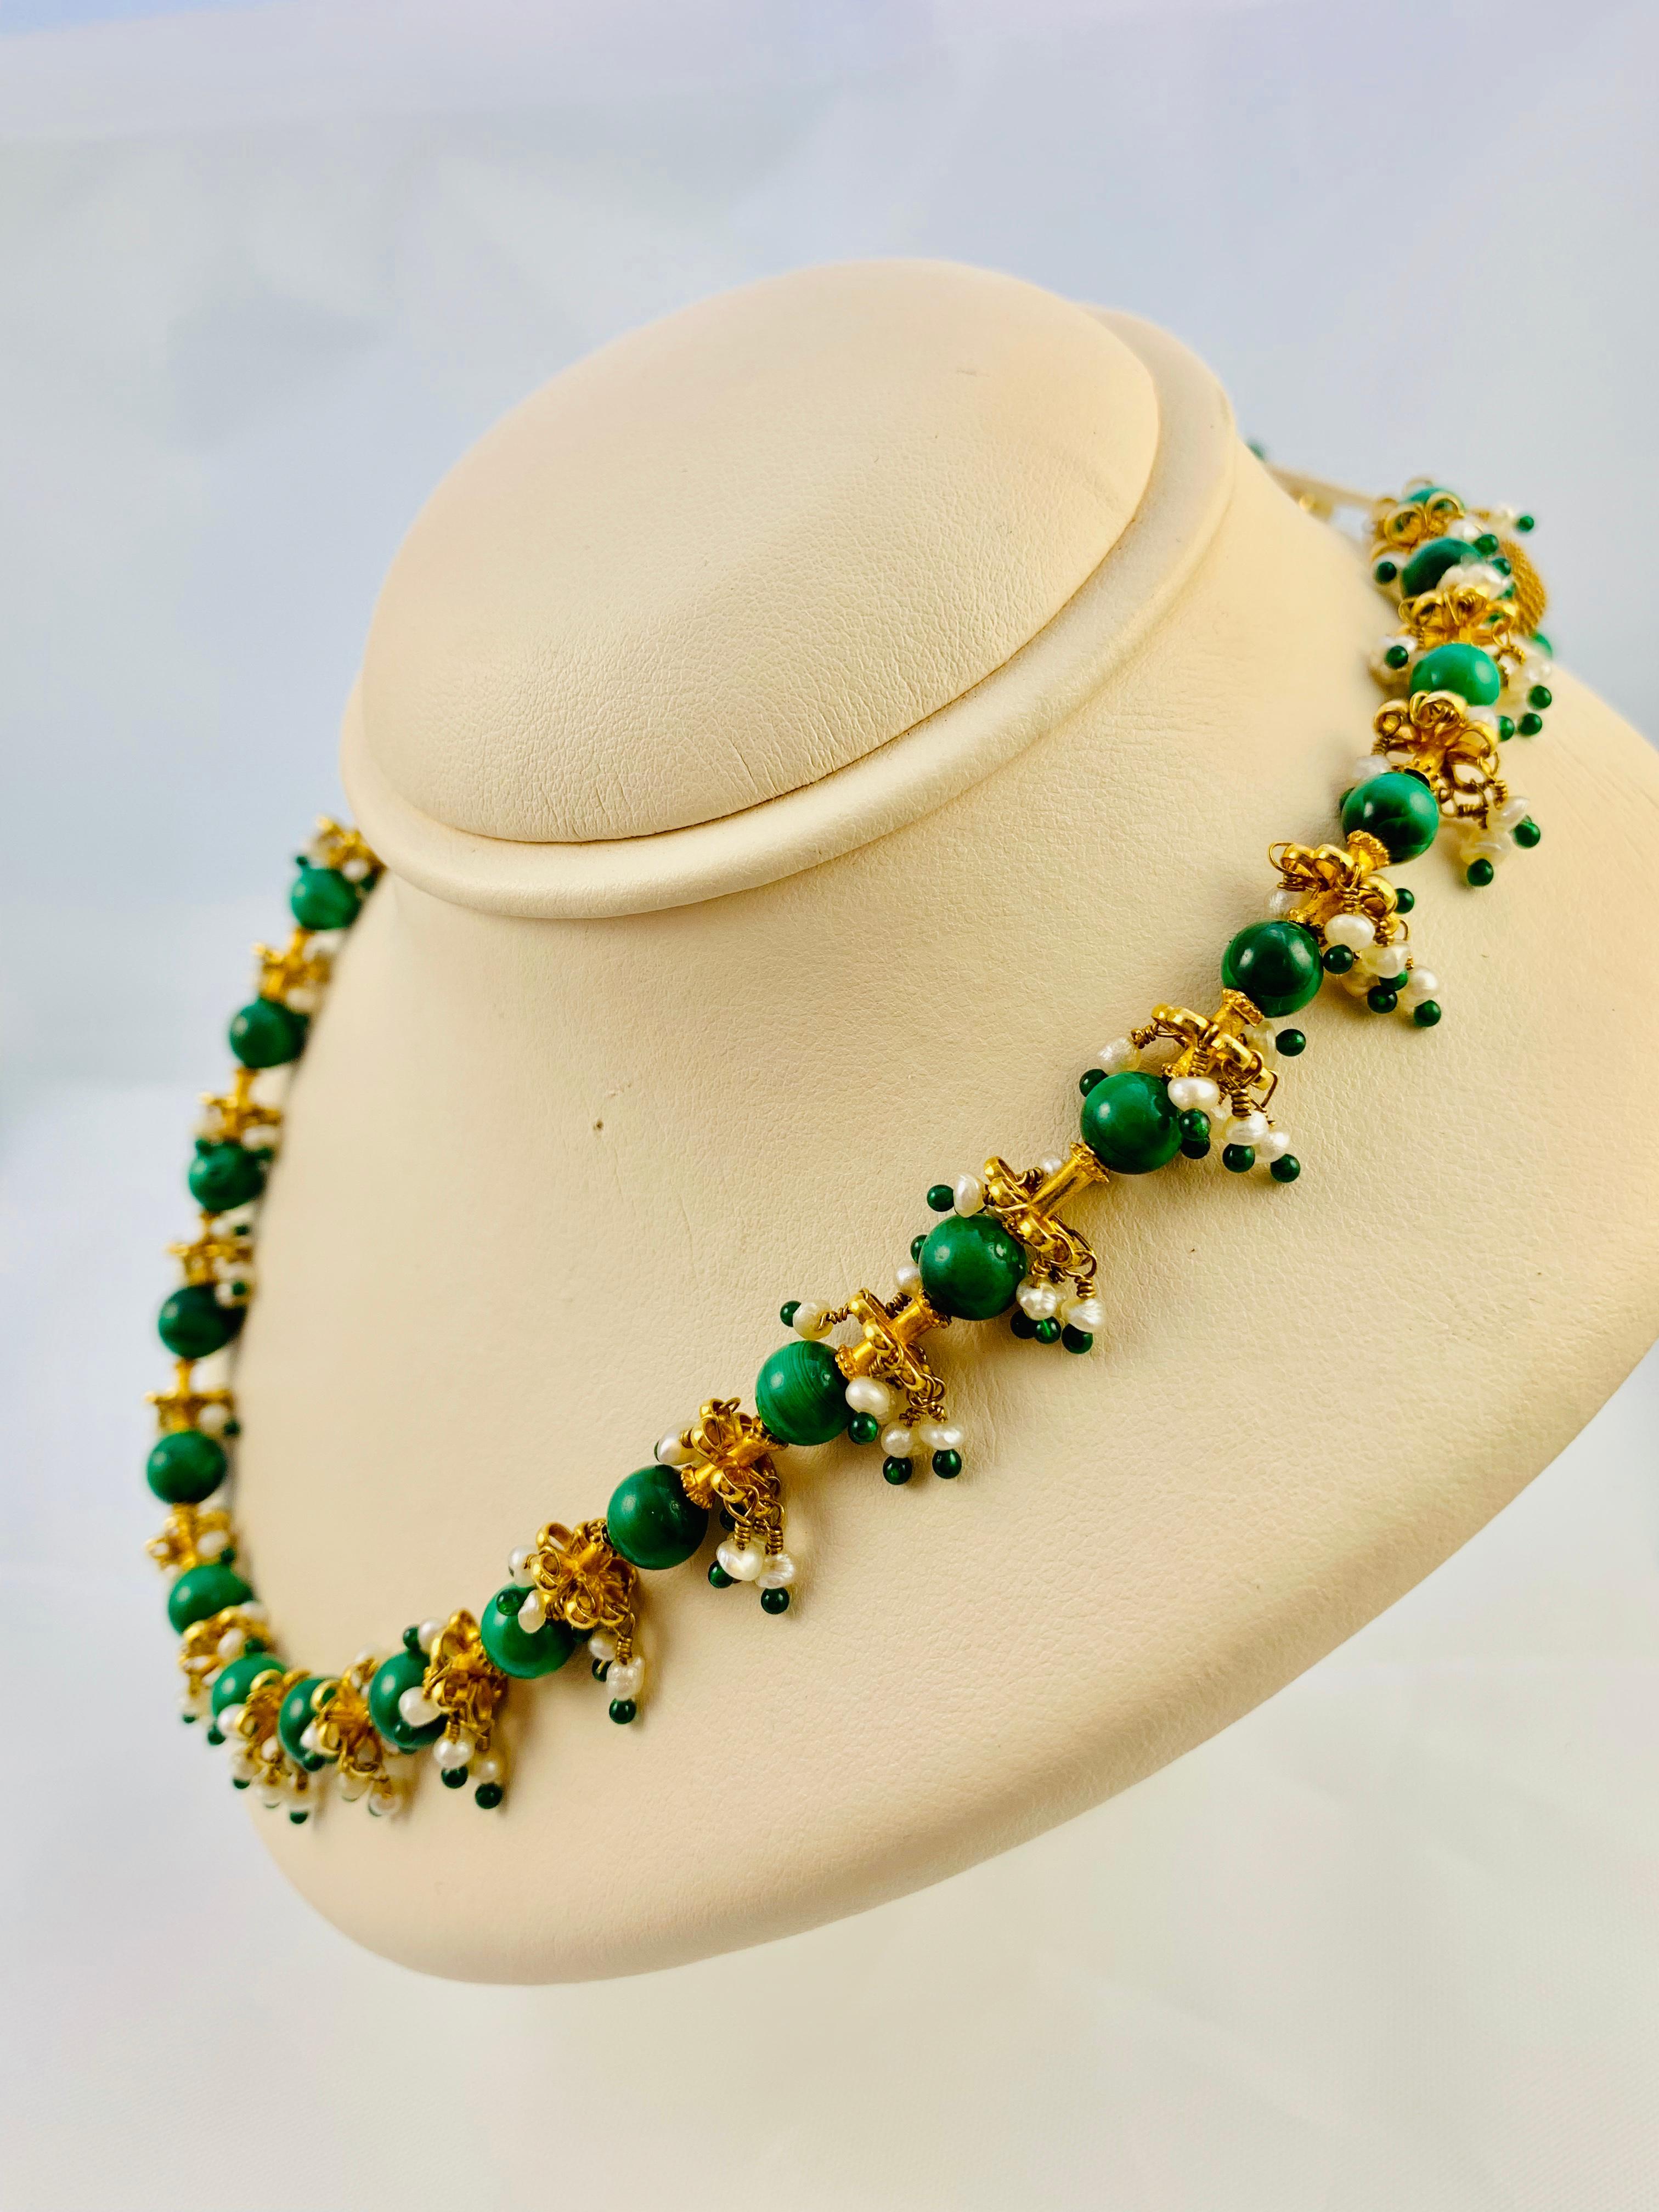 This necklace is an absolute show stopper! Middle Eastern Styled that features 32, 6.6 mm   
Malachite Beads that are separated by stunning 22K Yellow Gold floral themed stations with pearl and emerald dangles. It is 18 inches long and weighs 47.0